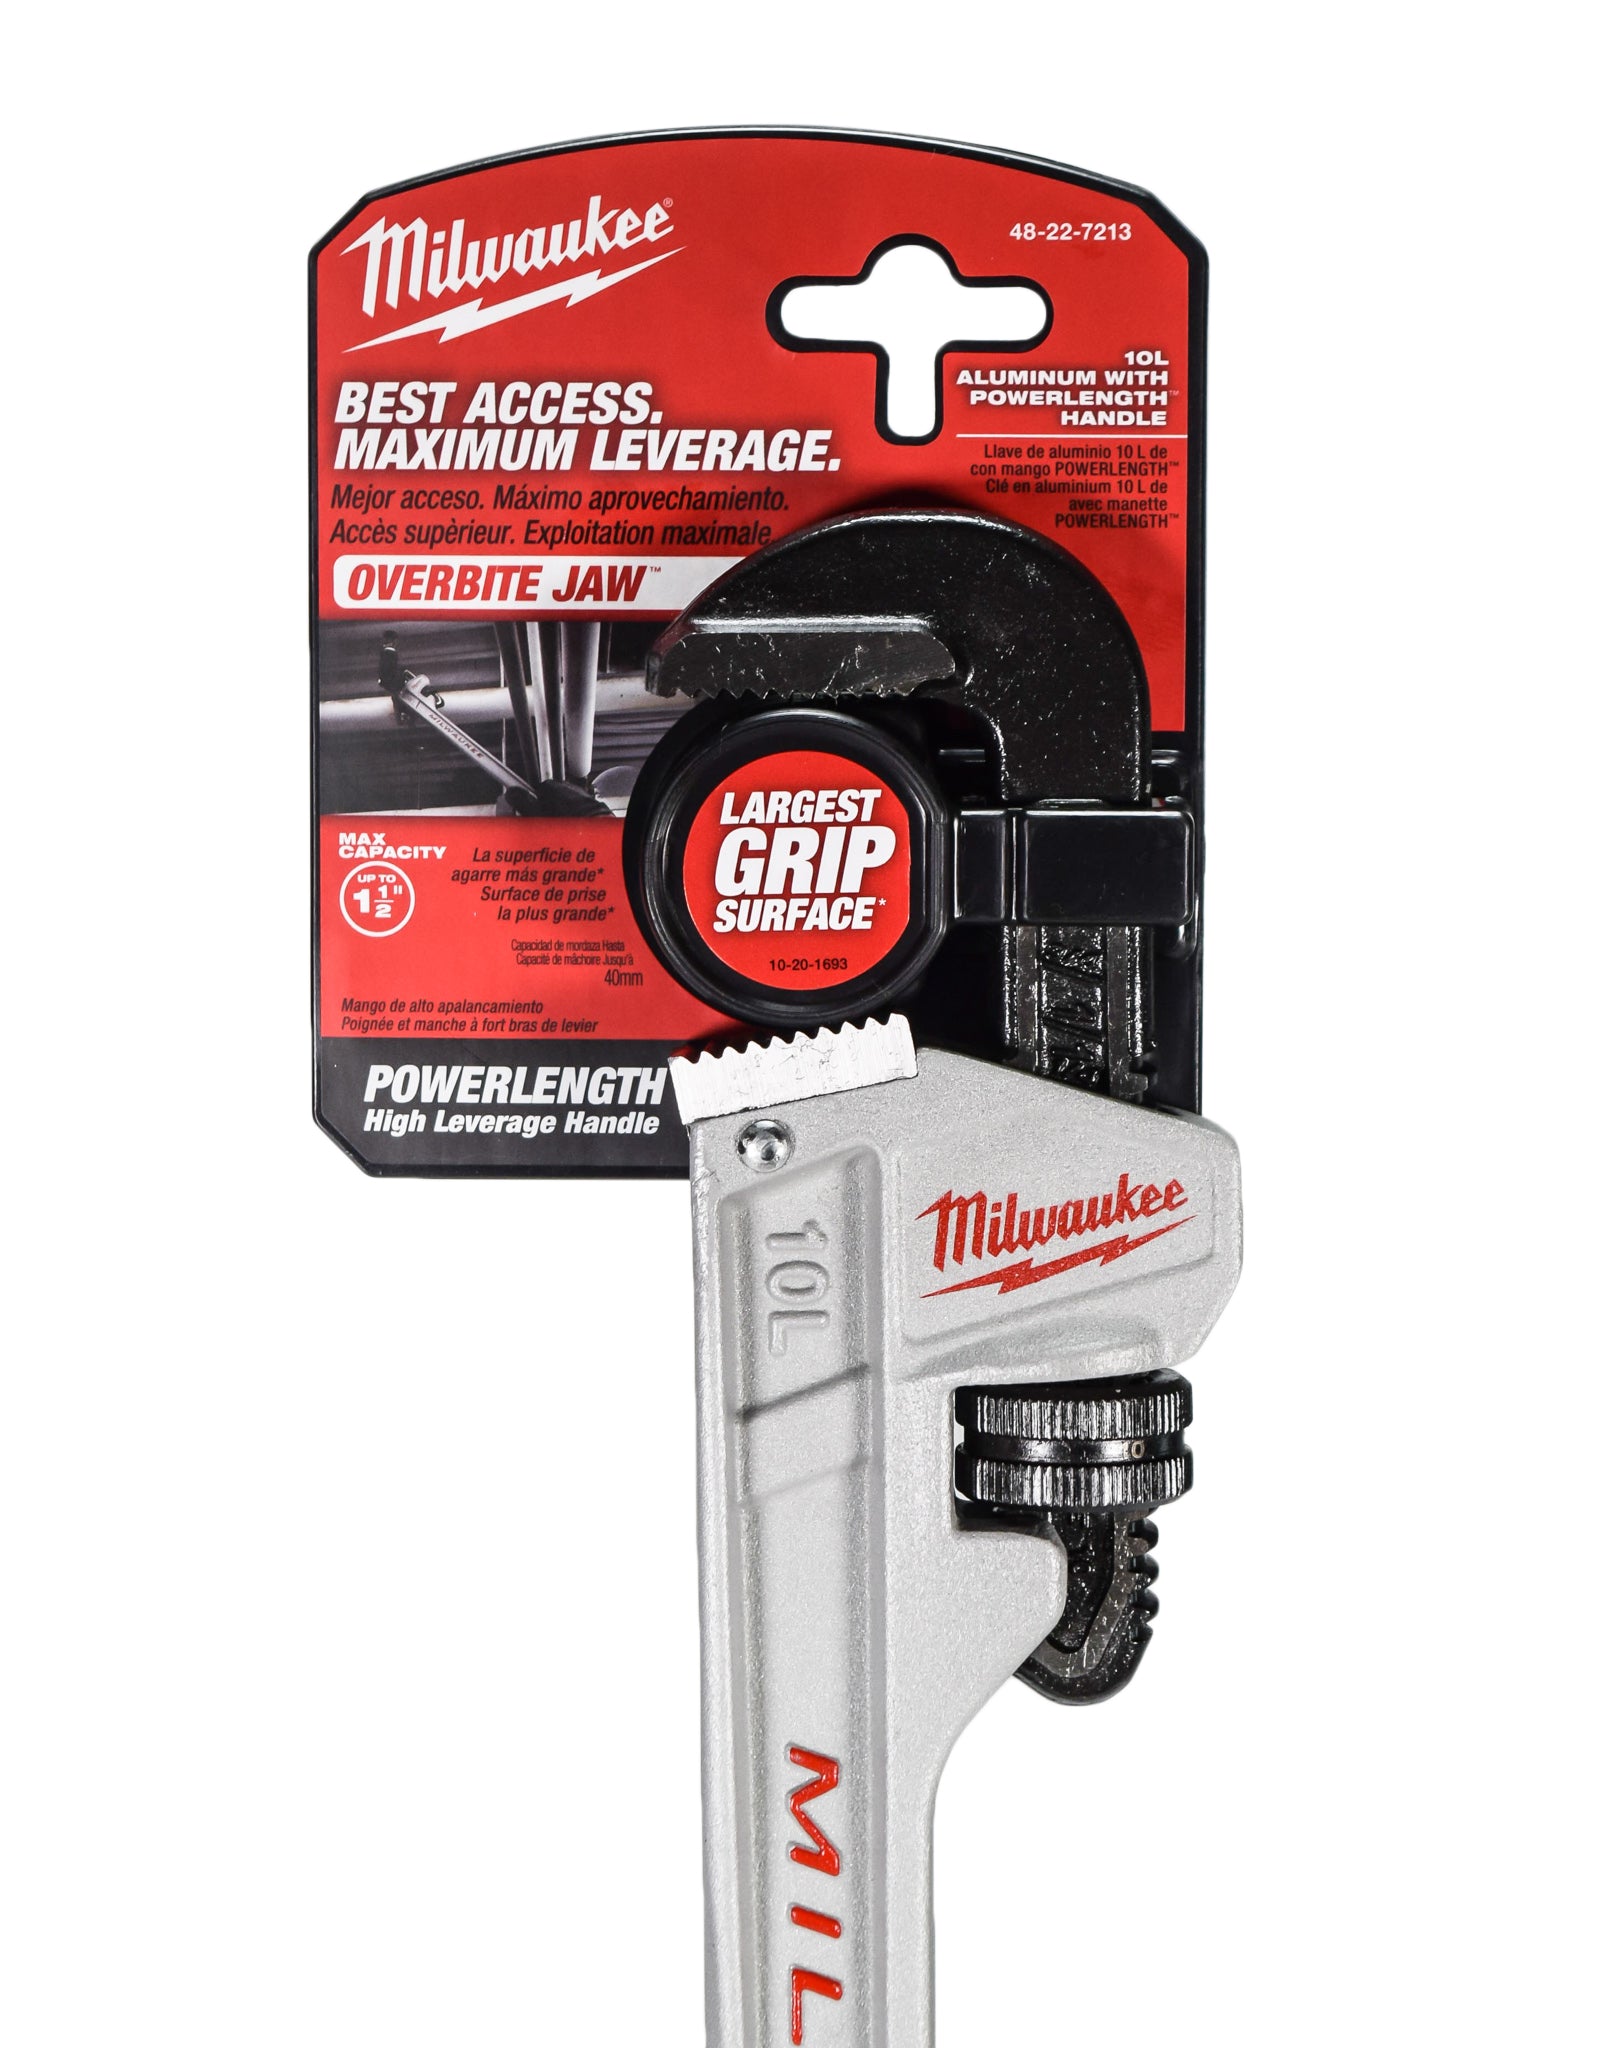 Milwaukee 10 in. Aluminum Pipe Wrench with POWERLENGTH Handle 48-22-7213